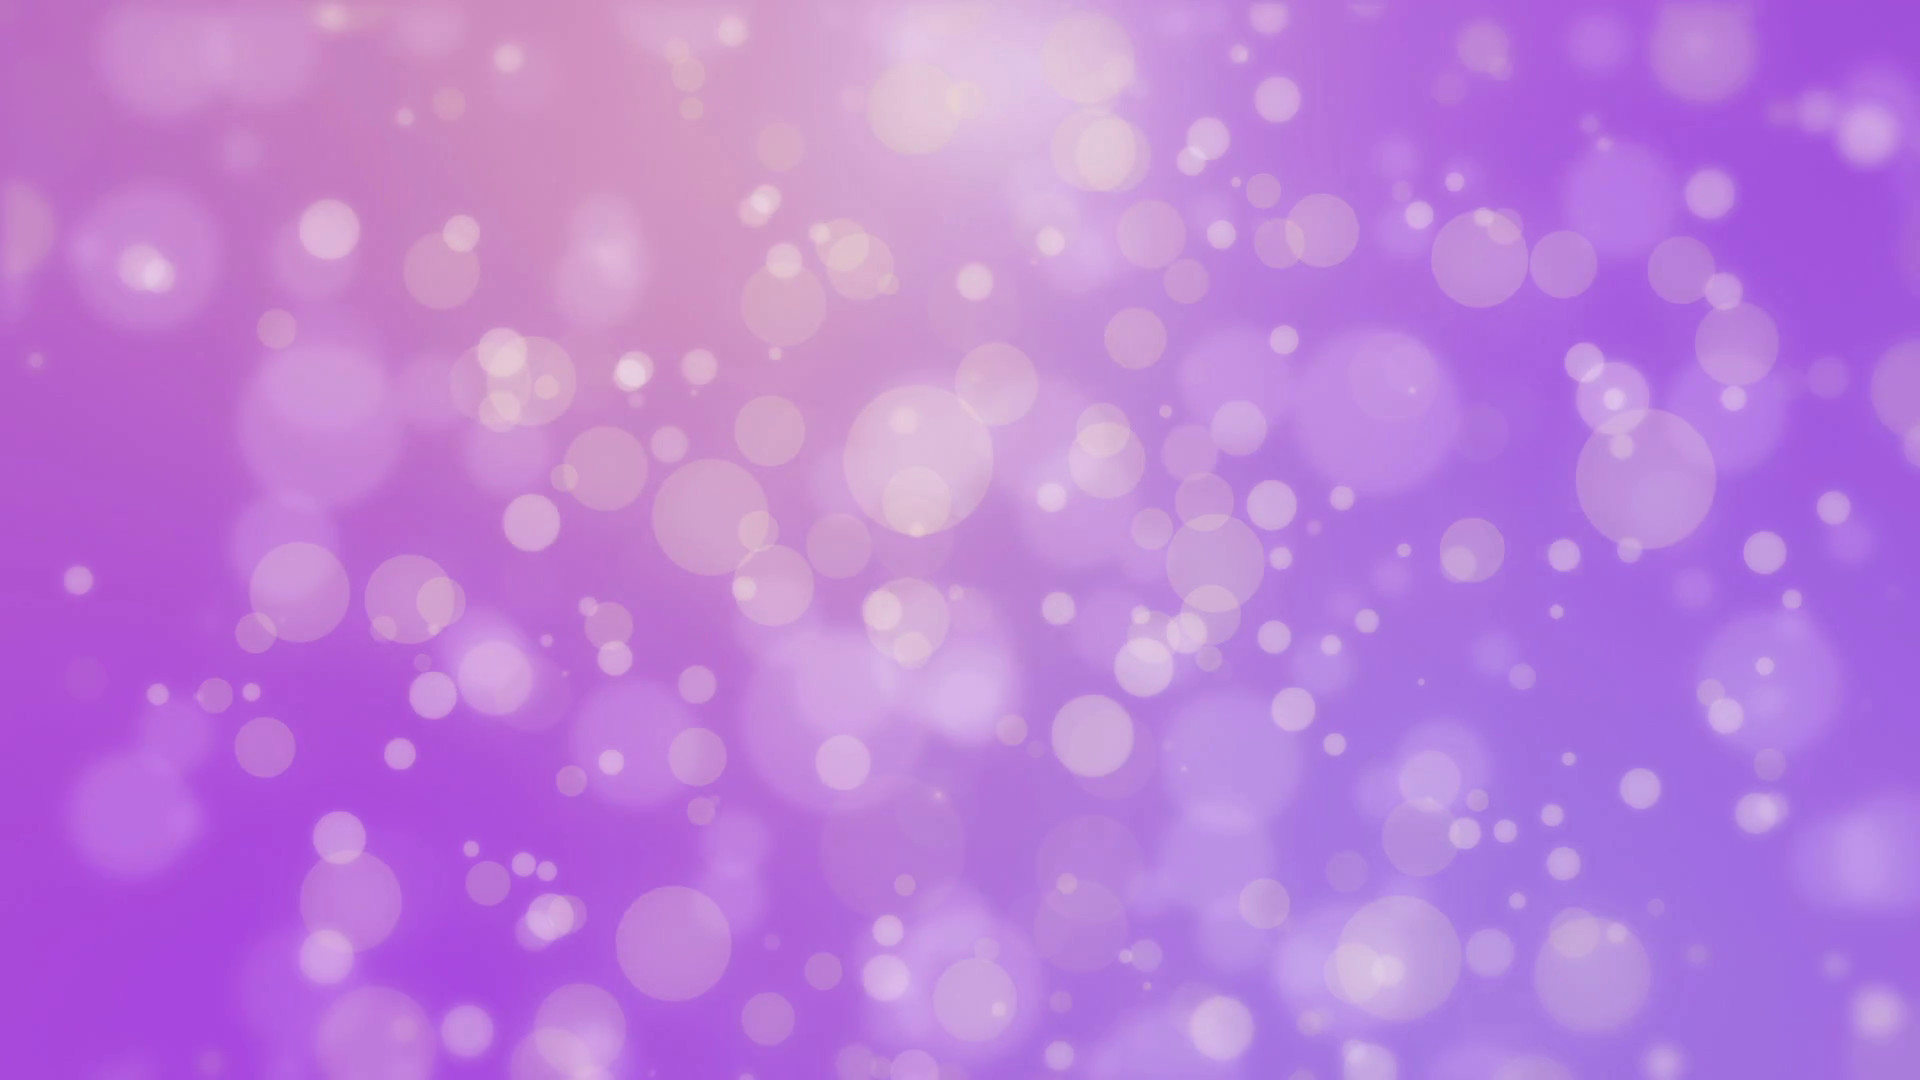 1920x1080   VIU 92 Pictures Of Pretty Backgrounds 0 18 Mb Source  Ã‚ÃÂ· Light Purple Backgrounds